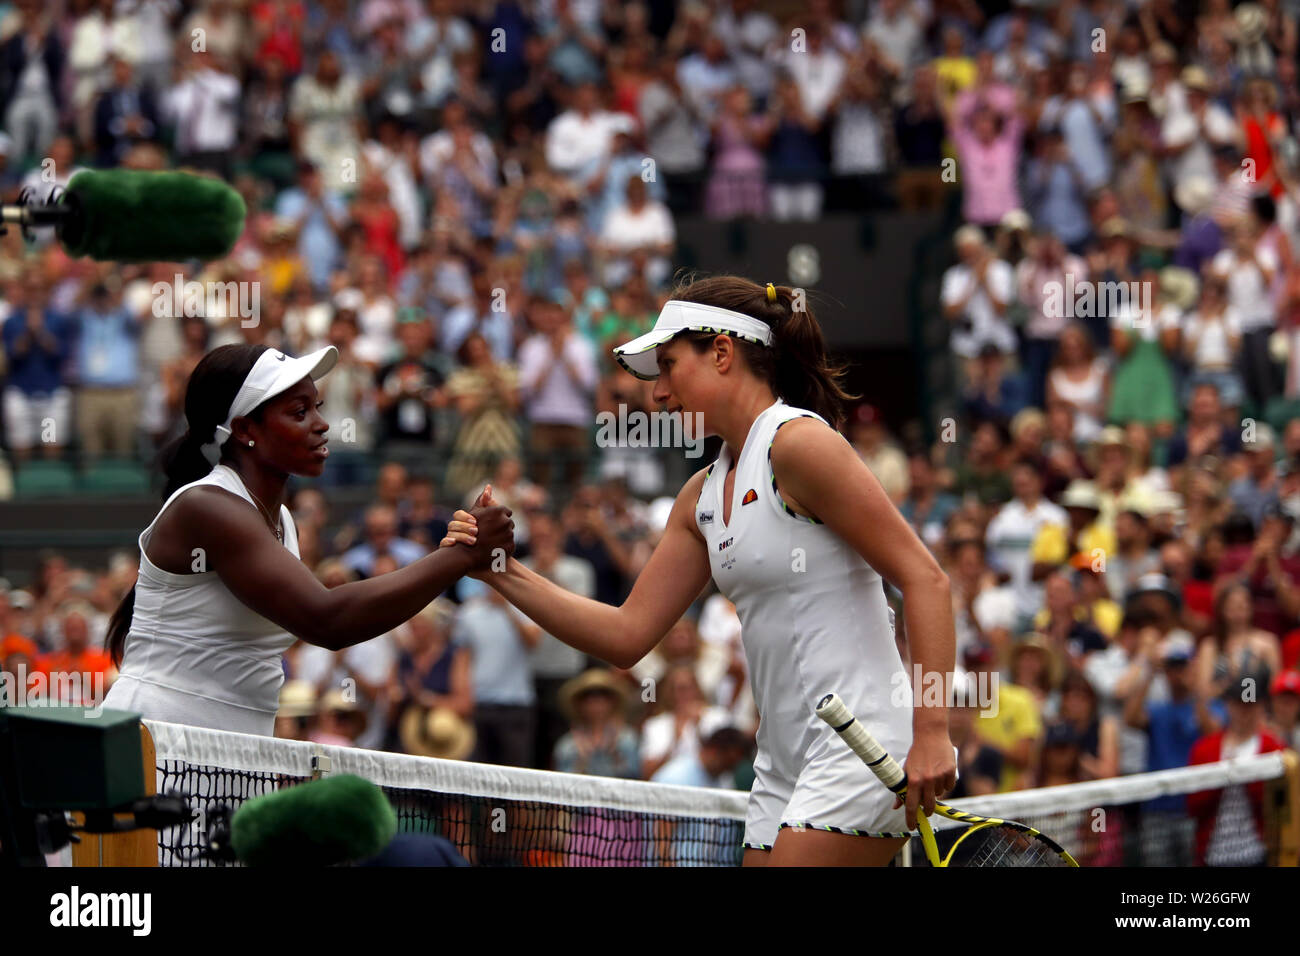 Wimbledon, 6 July 2019 - Johanna Konta of Great Britain congratulates her opponent, American Sloane Stephens, after Konta defeated her in their third round match  at Wimbledon. Credit: Adam Stoltman/Alamy Live News Stock Photo